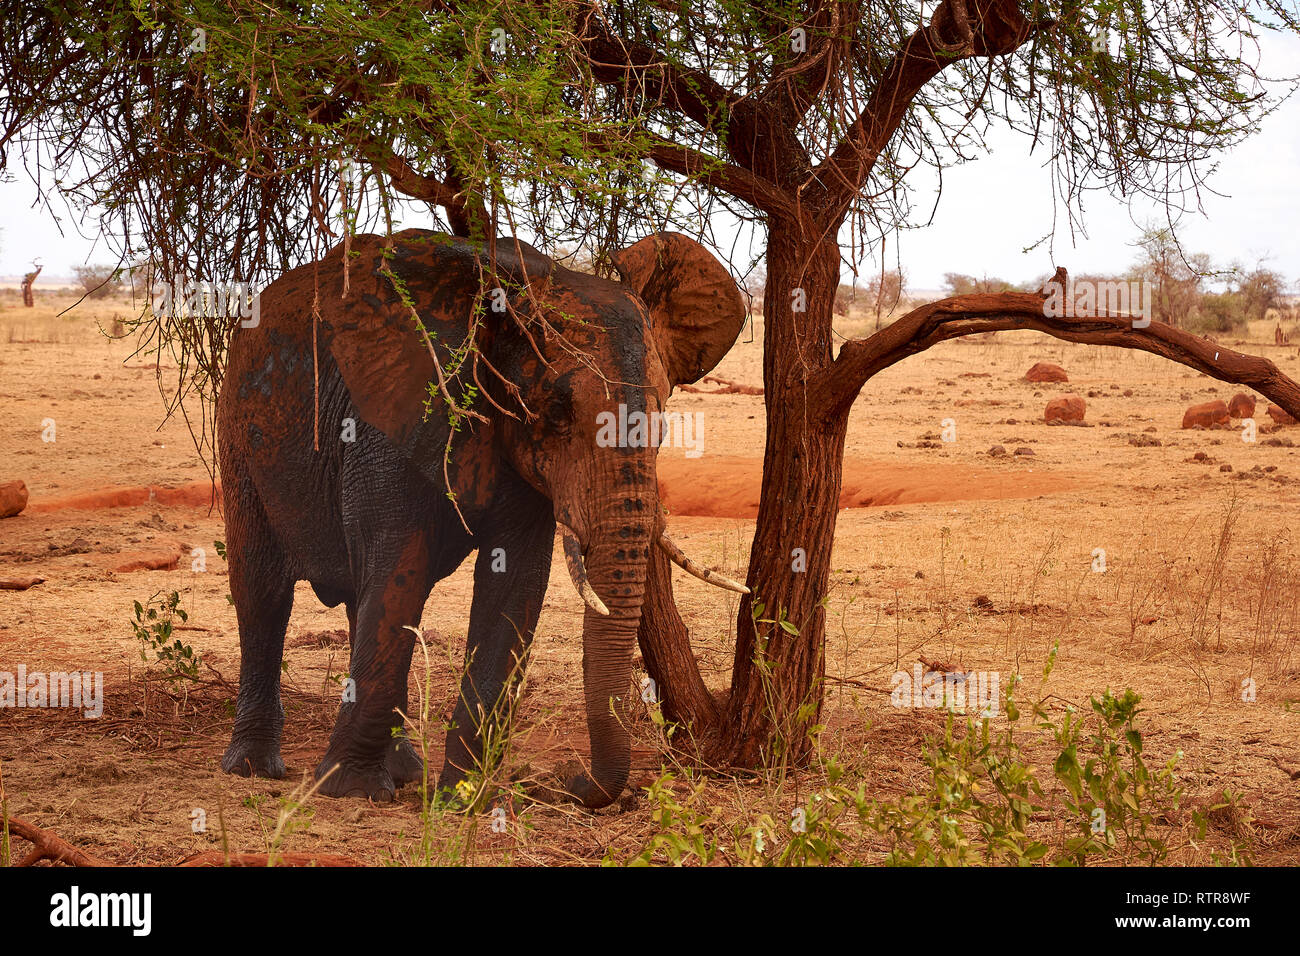 View of an elephant to a tree and landscape in the background. Safari Tsavo Park in Kenya, Africa. Stock Photo